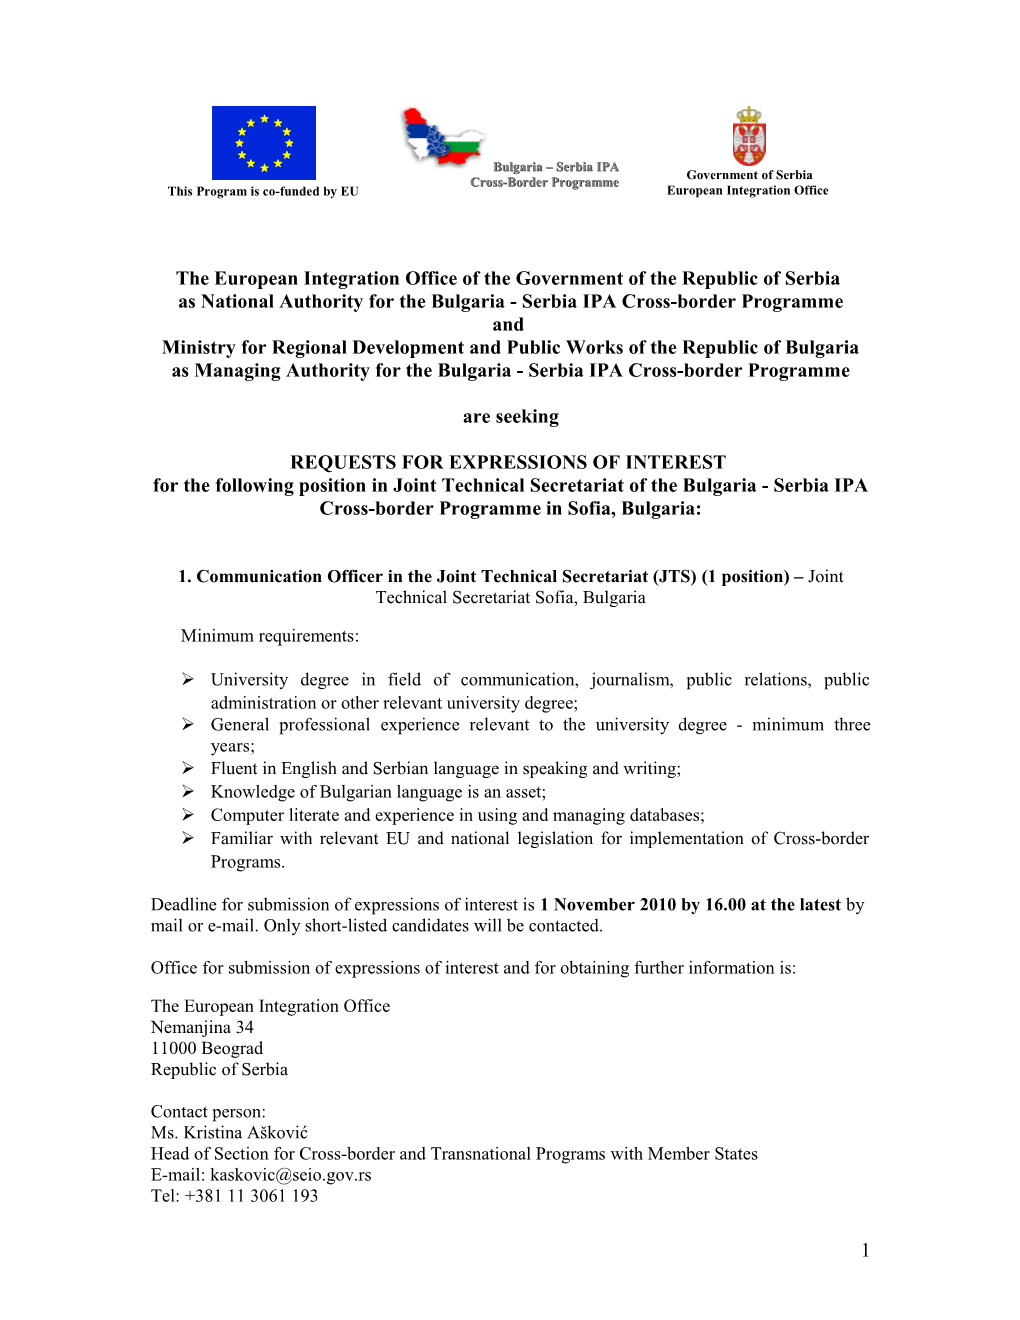 Call for Proposals to Be Co-Financed in the Frame of the Bulgaria Serbia and Montenegro